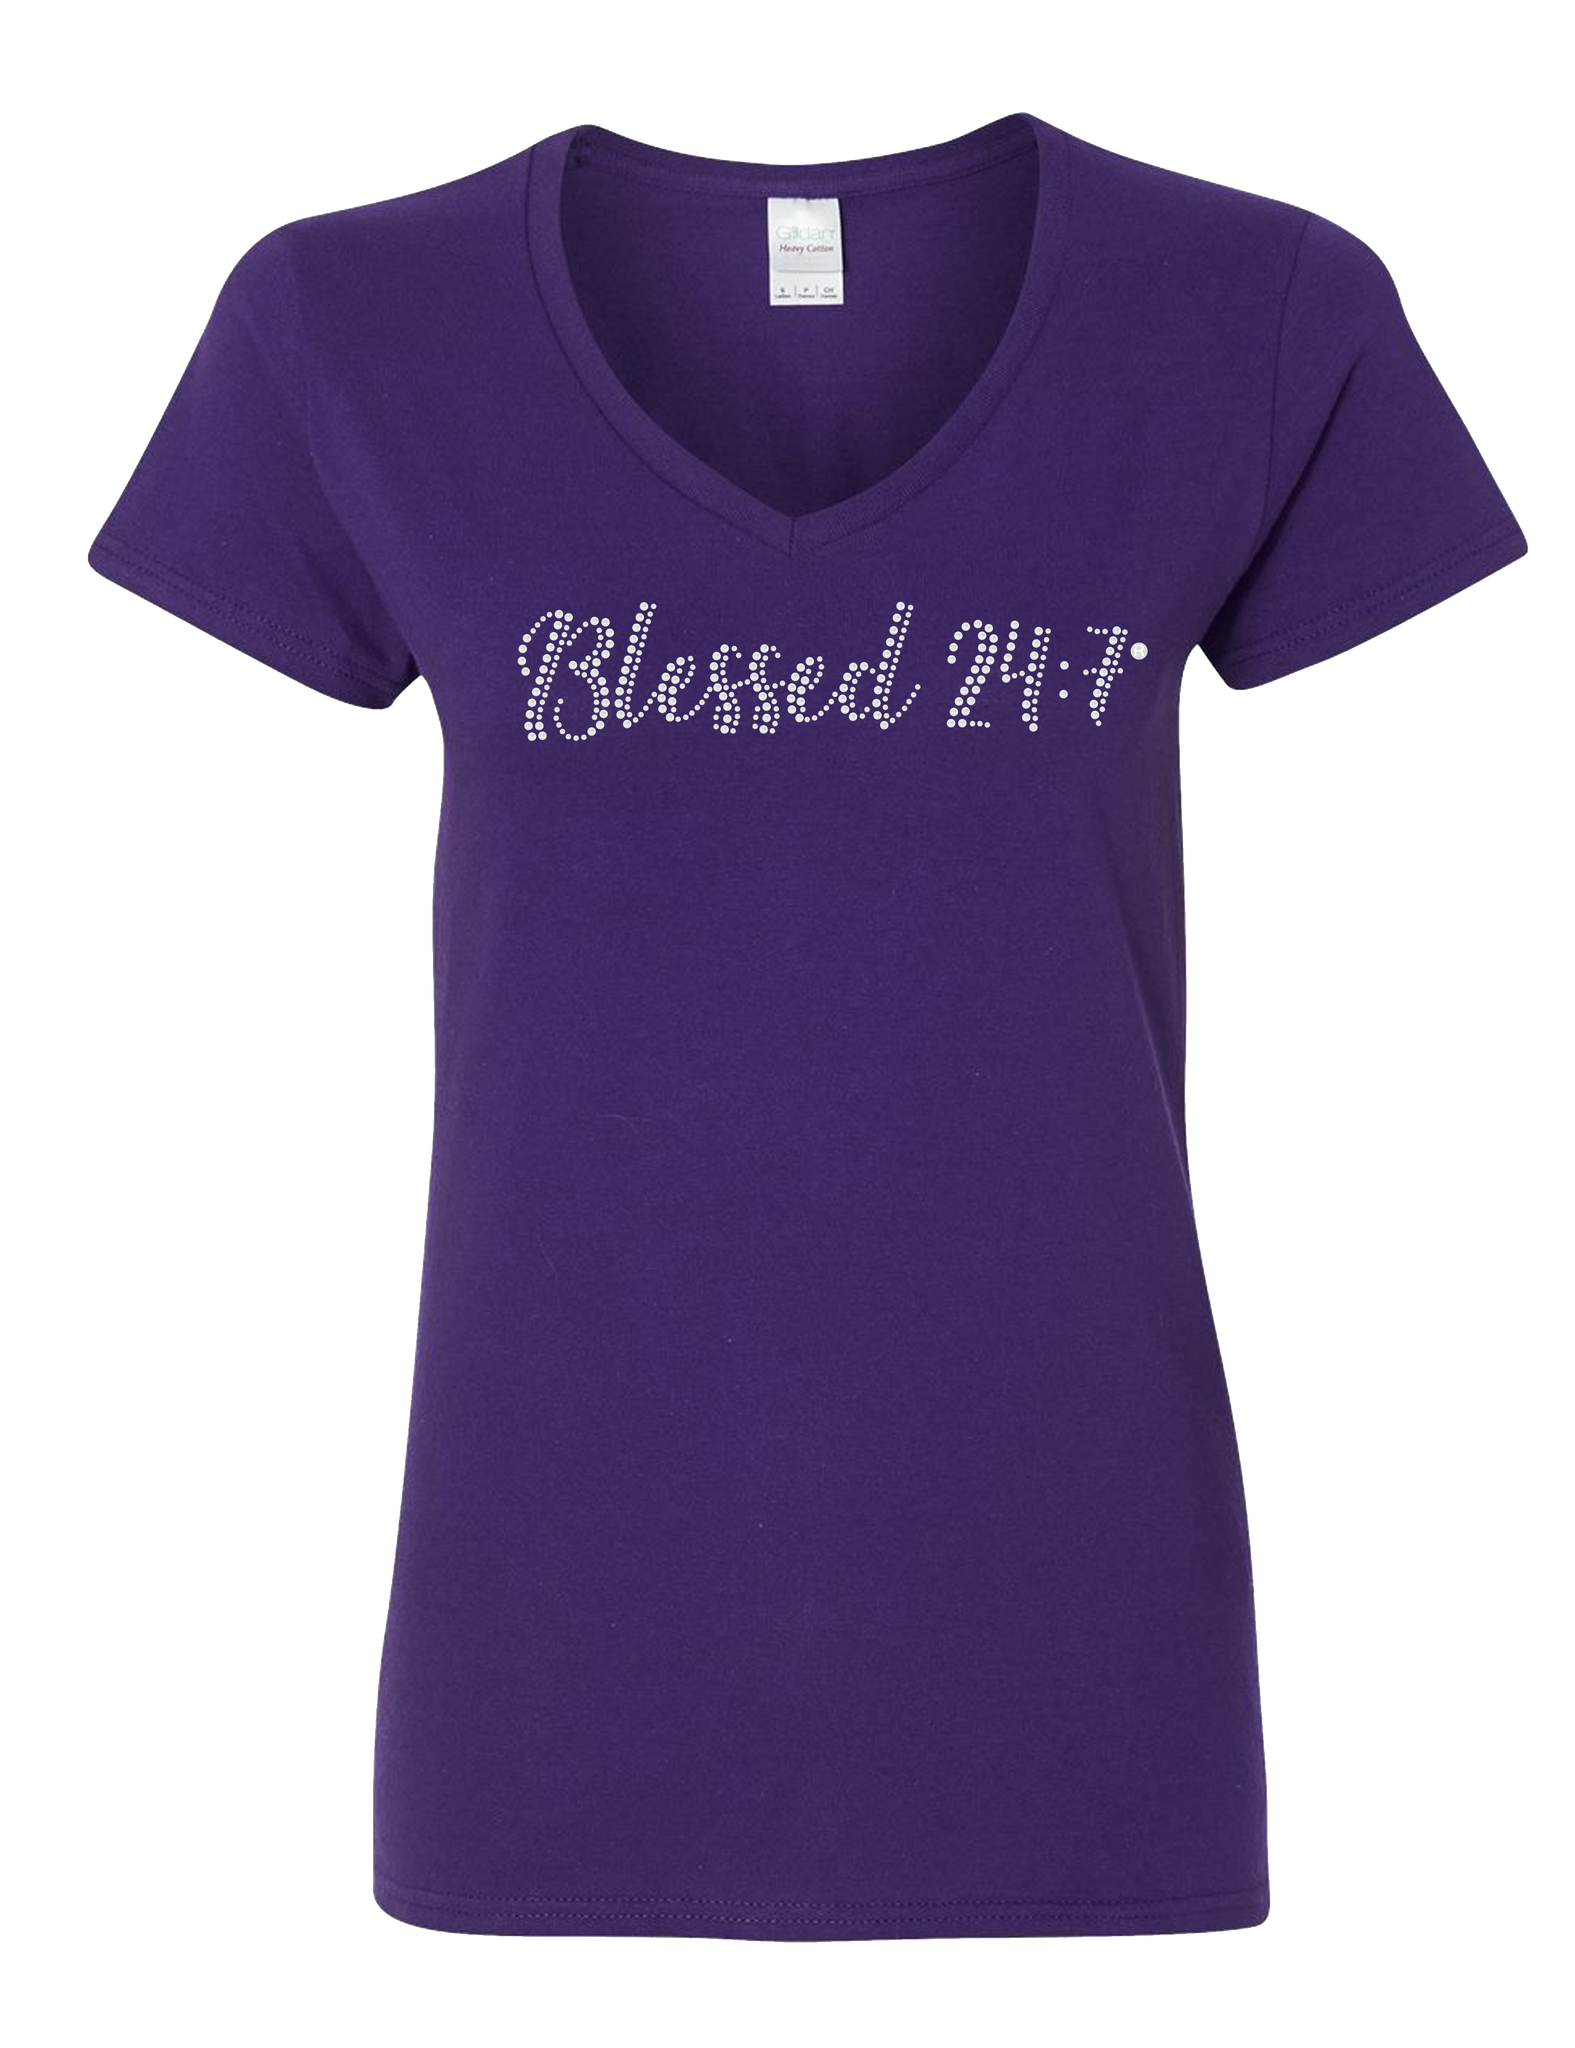 Blessed 24:7 BLING Rhinestone V-NECK T-shirts – Blessed 24:7®️ Gifts